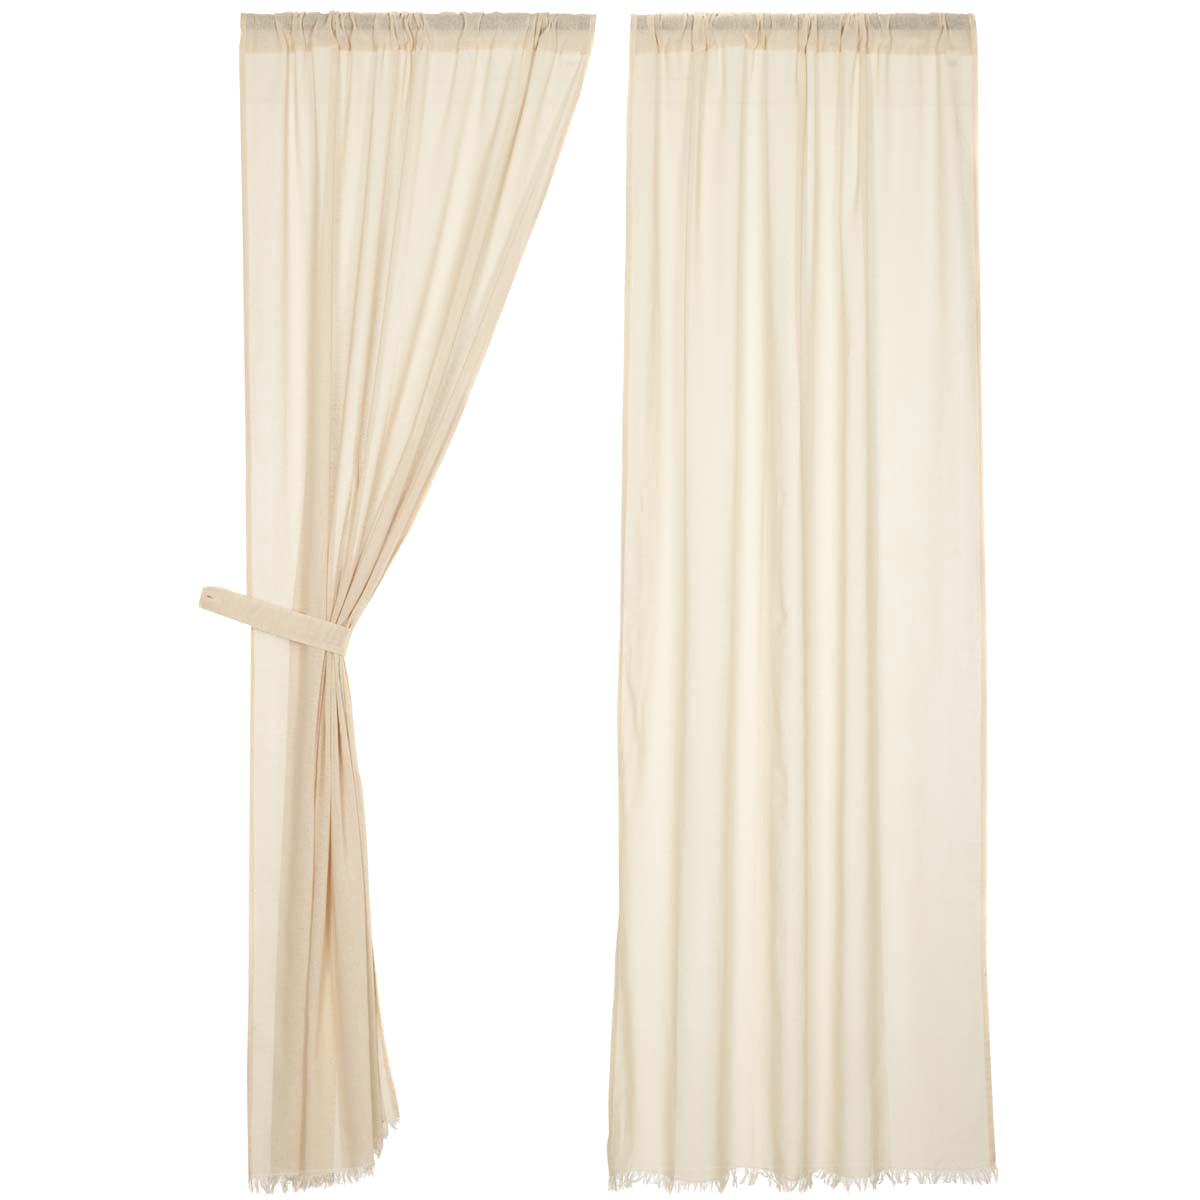 Curtains Image PNG Download Free PNG Image